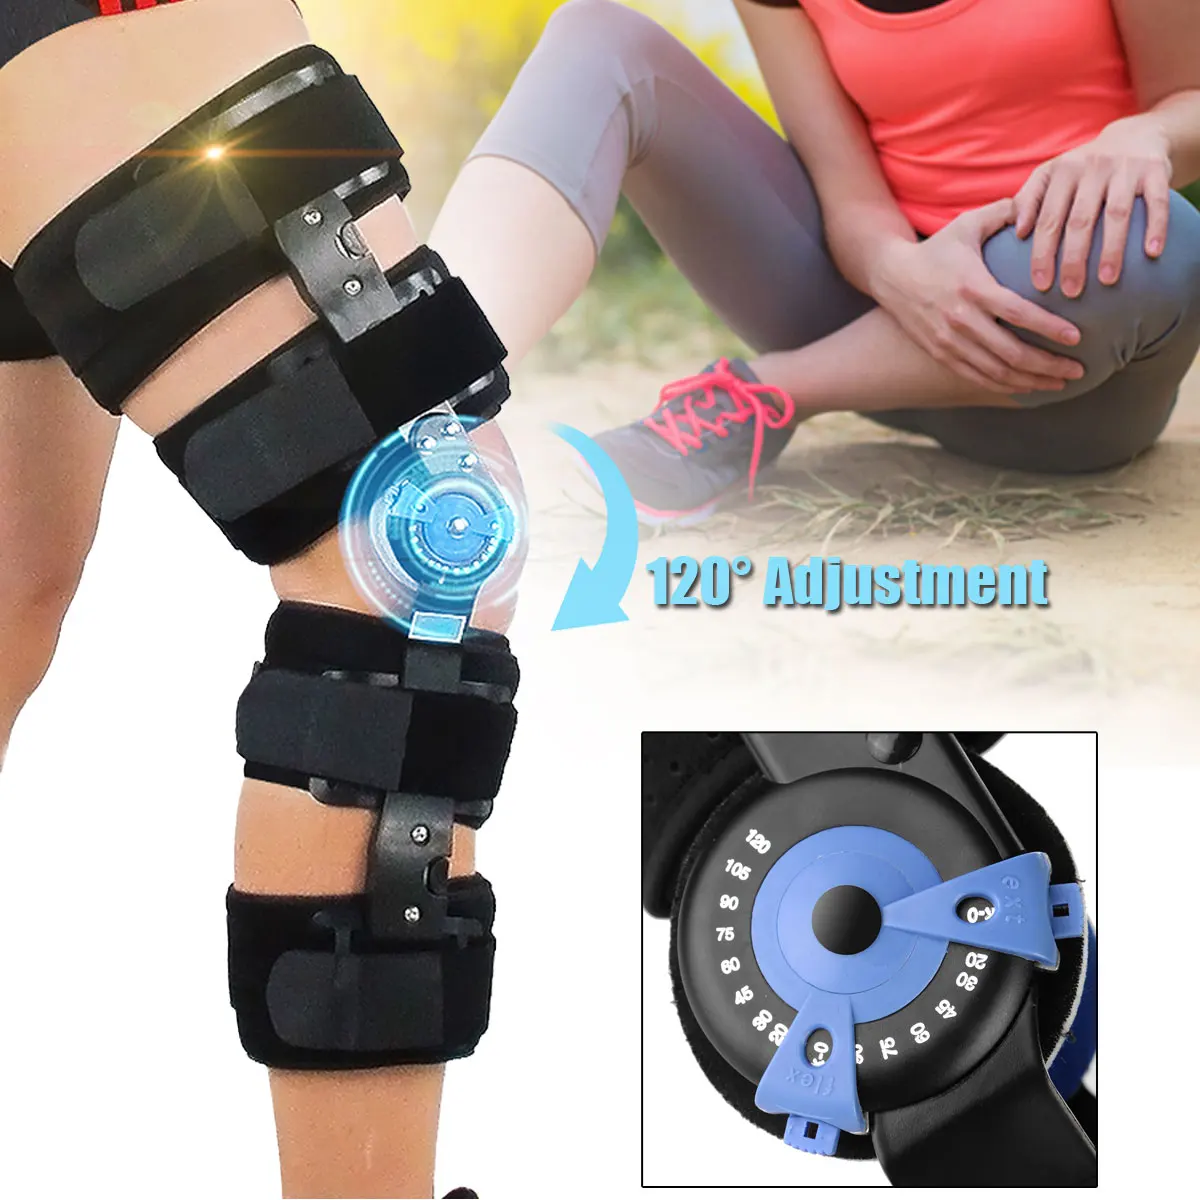 Details about   1PCS Adjustable Hinged Knee Brace Leg Support Stabilizer Injuries 120° T-Scope 